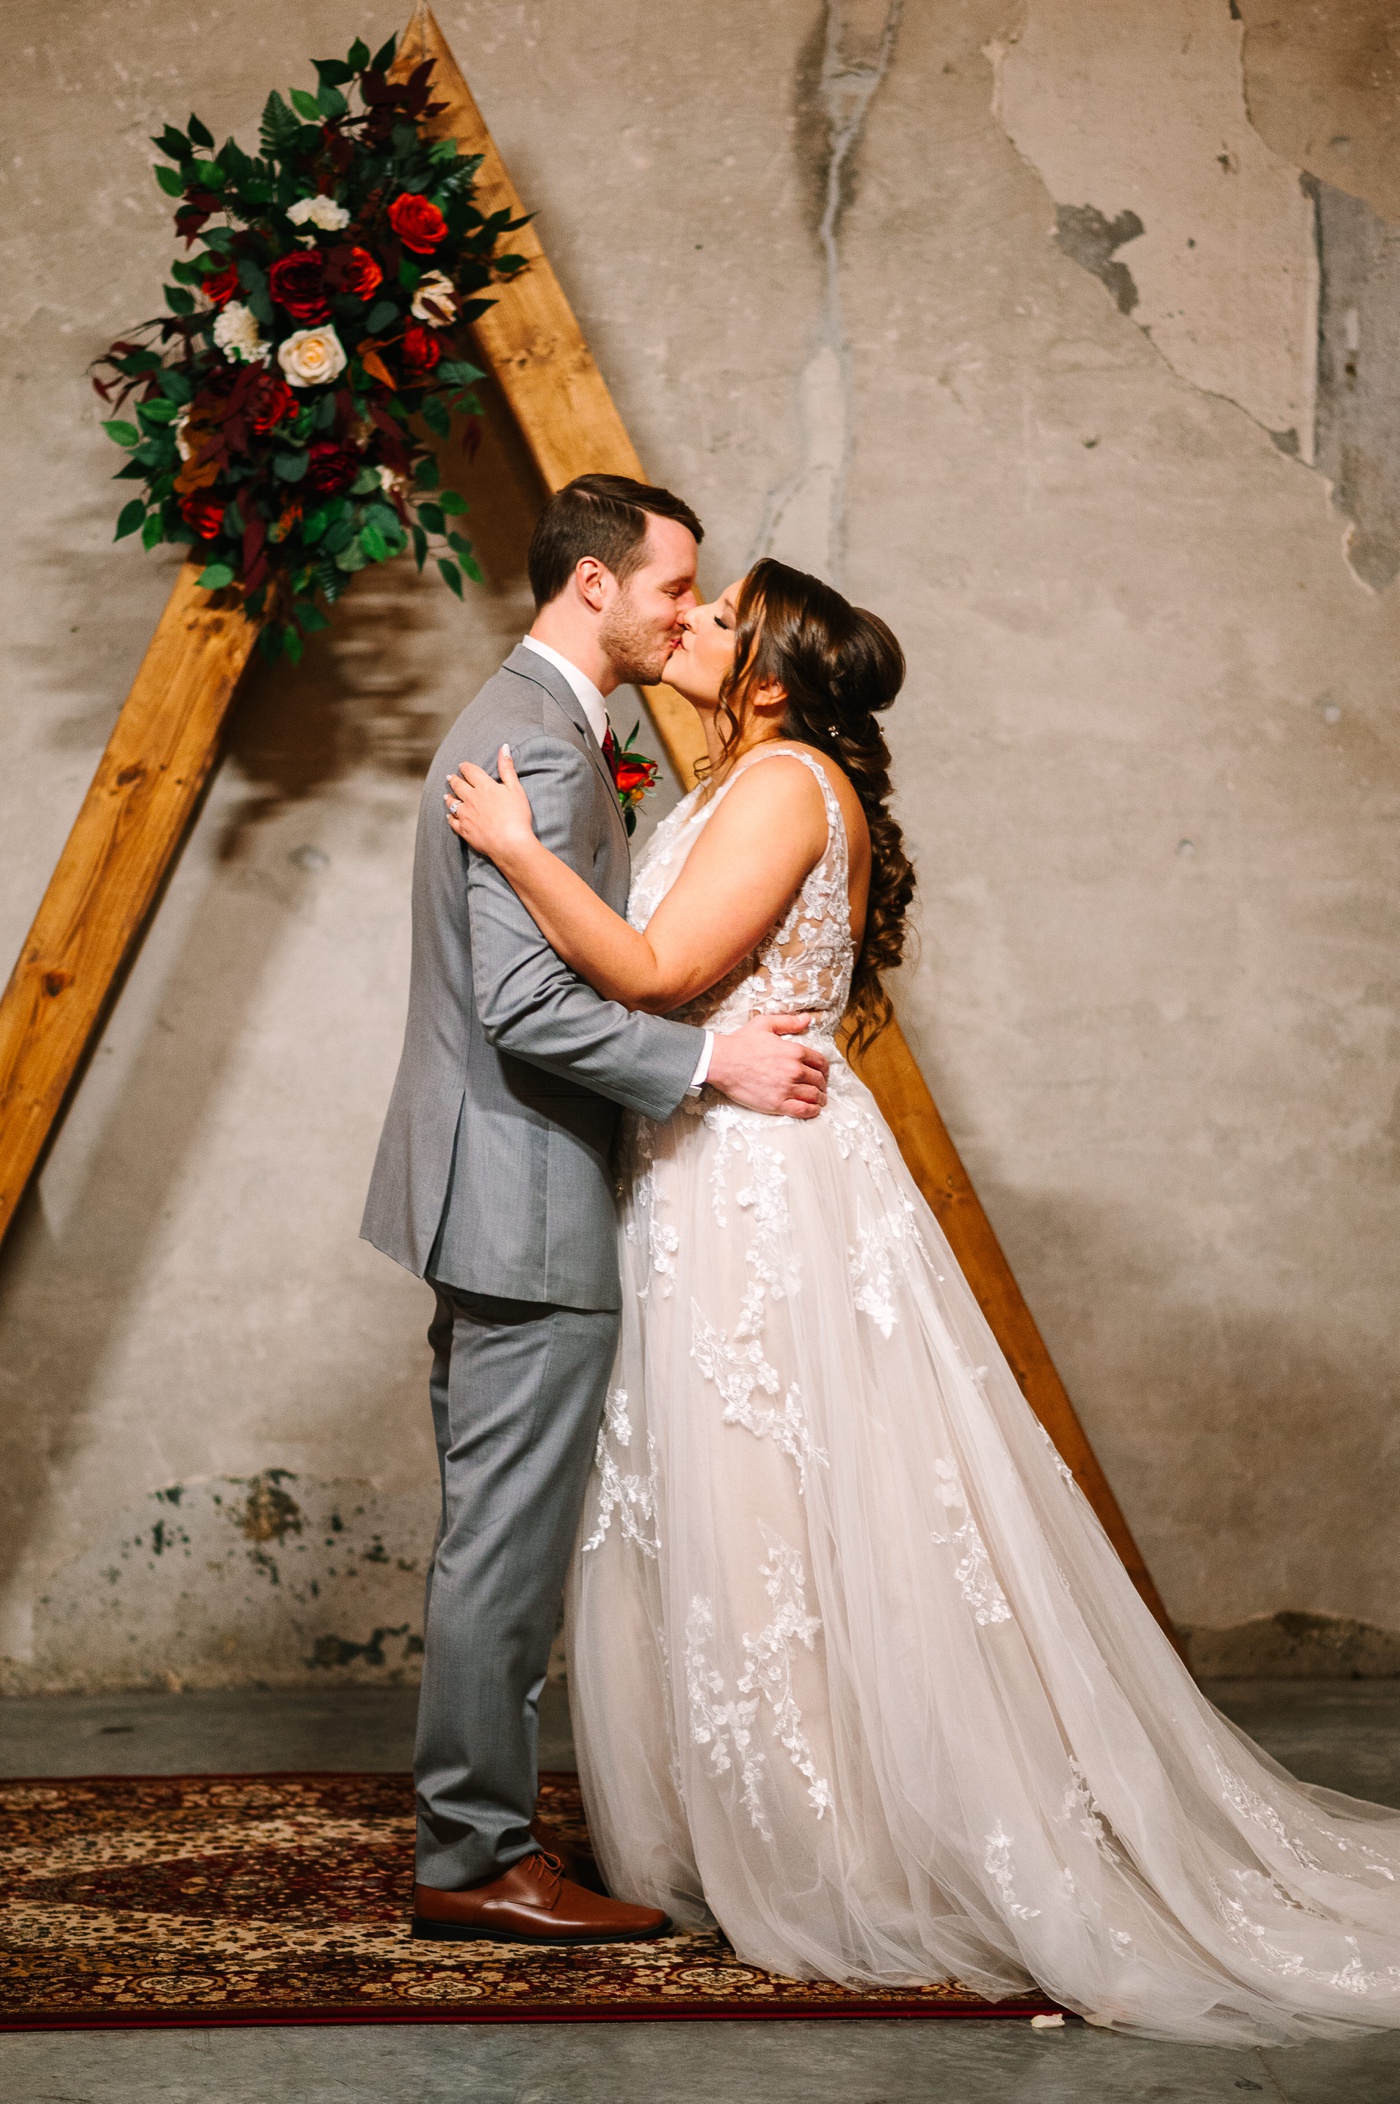 Bride and groom kissing at their Indianapolis wedding ceremony